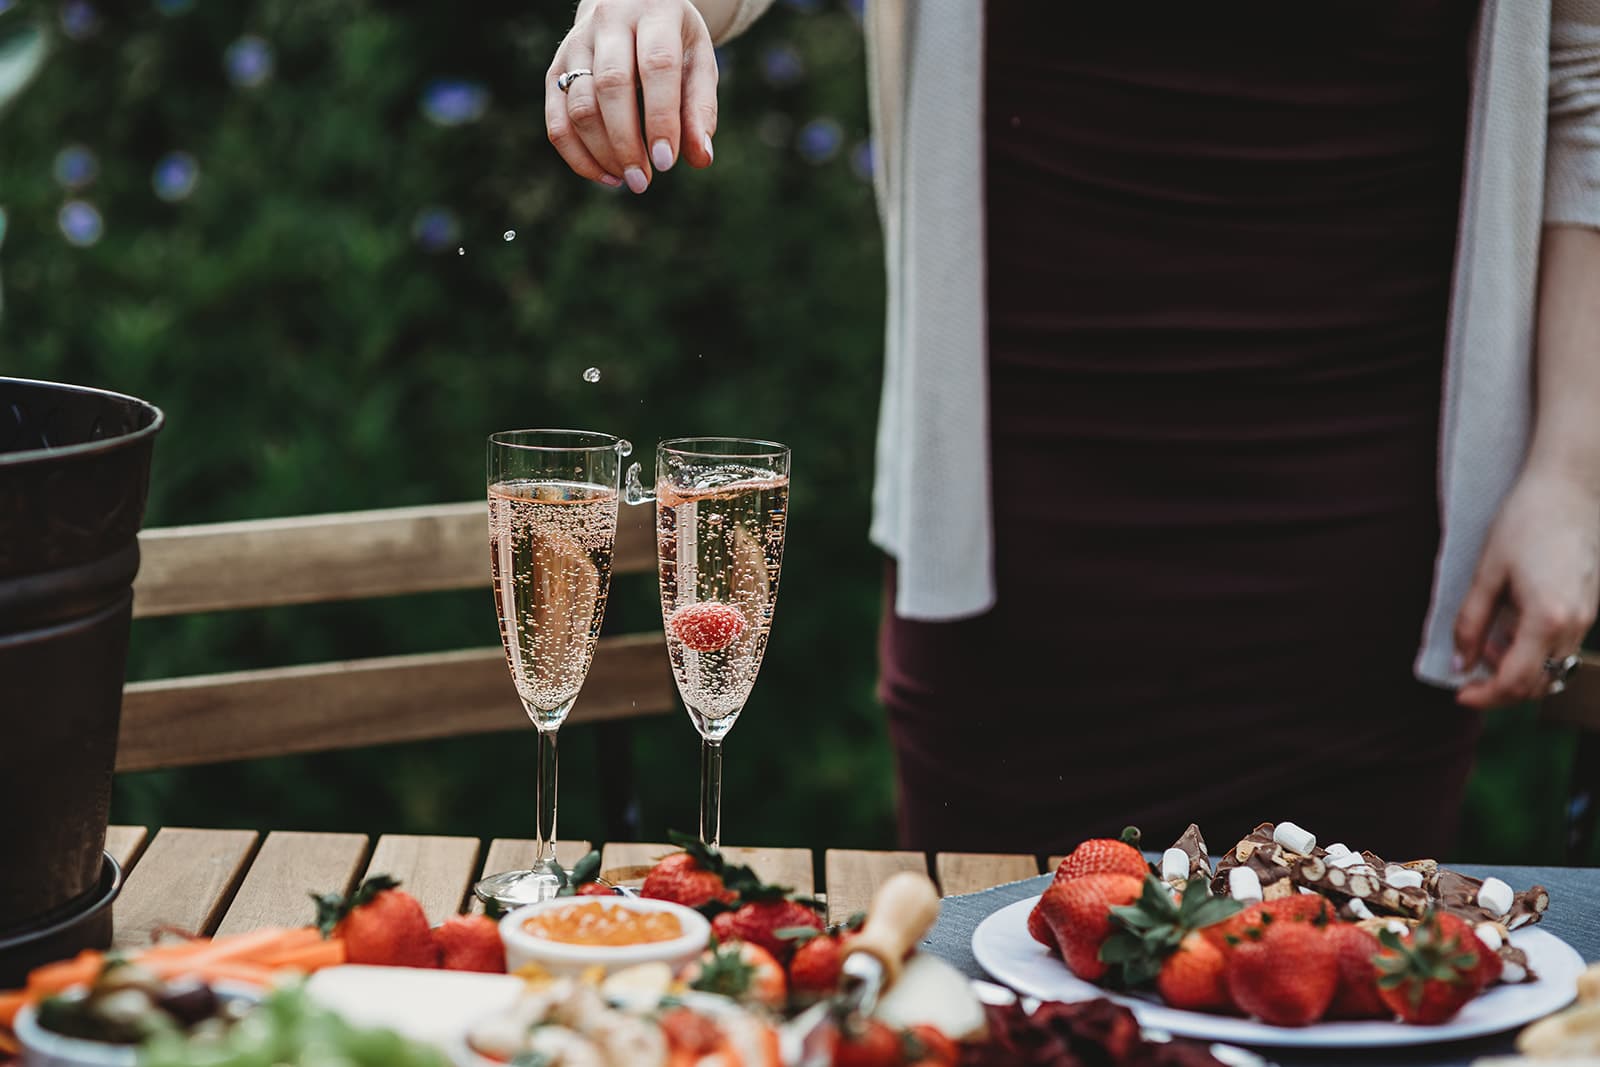 Shot of someone dropping strawberries into glasses of champagne